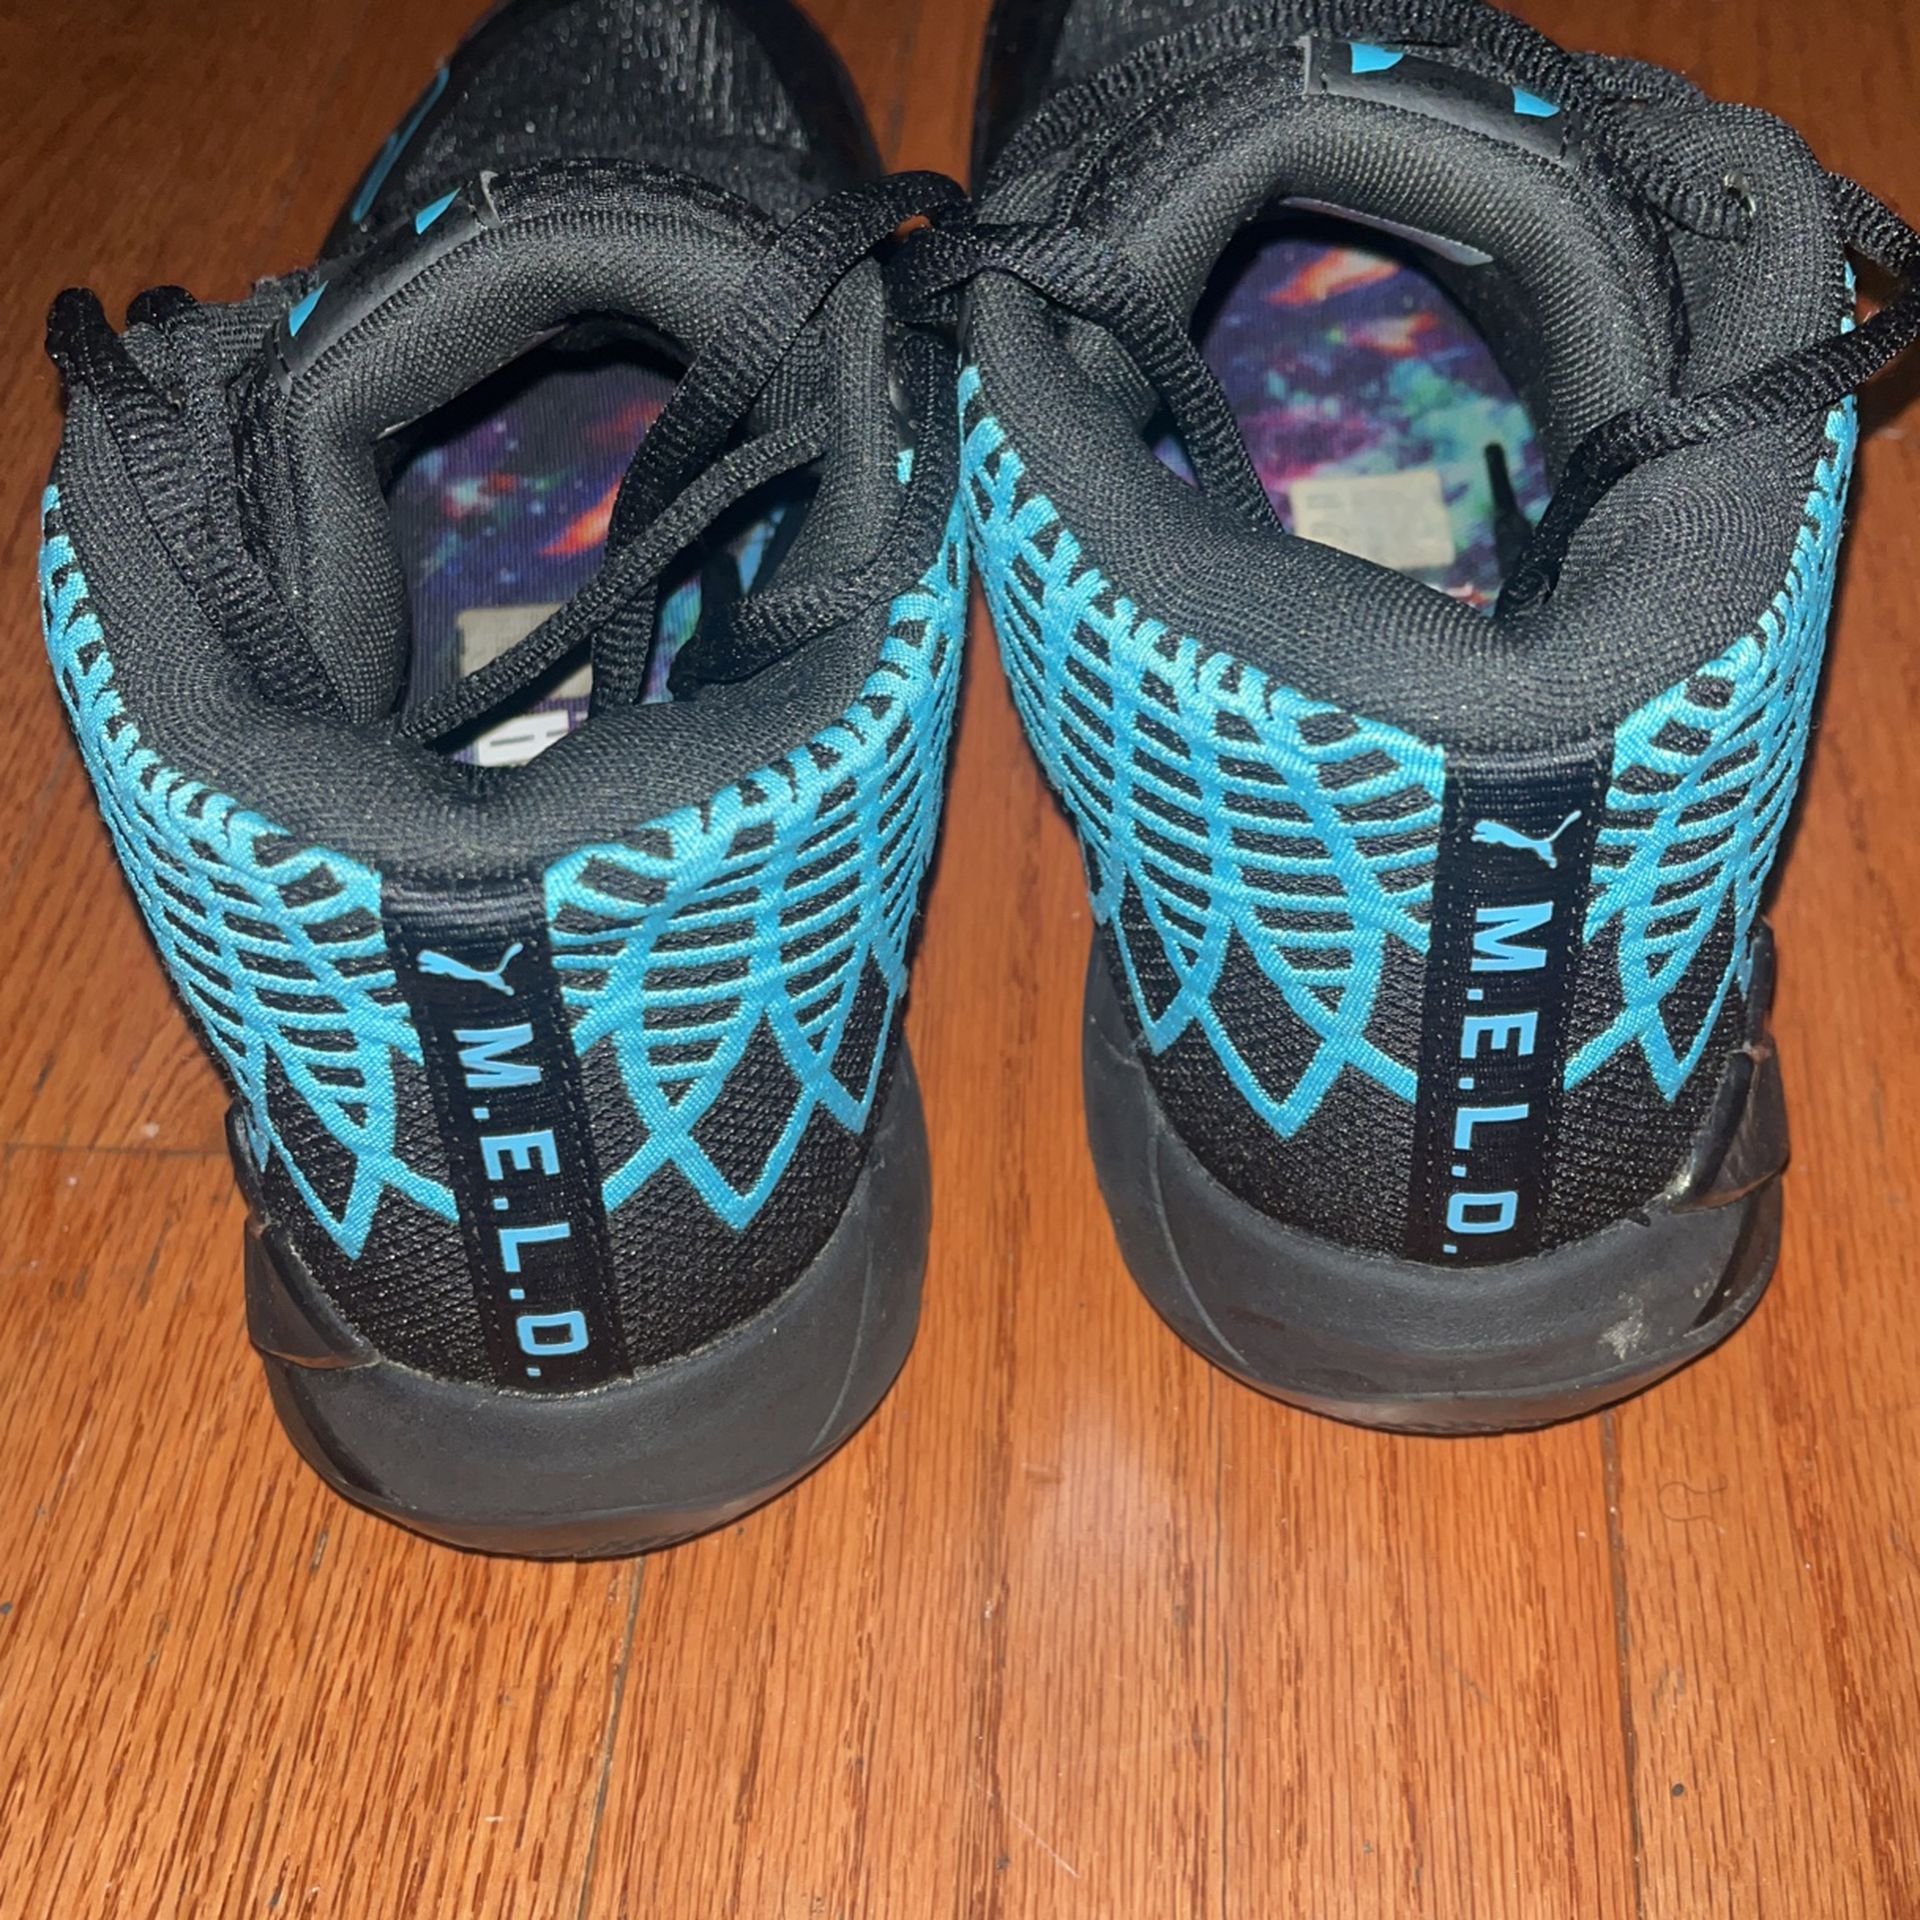 Puma LaMelo Ball MB.01 Buzz City for Sale in Hackensack, NJ - OfferUp